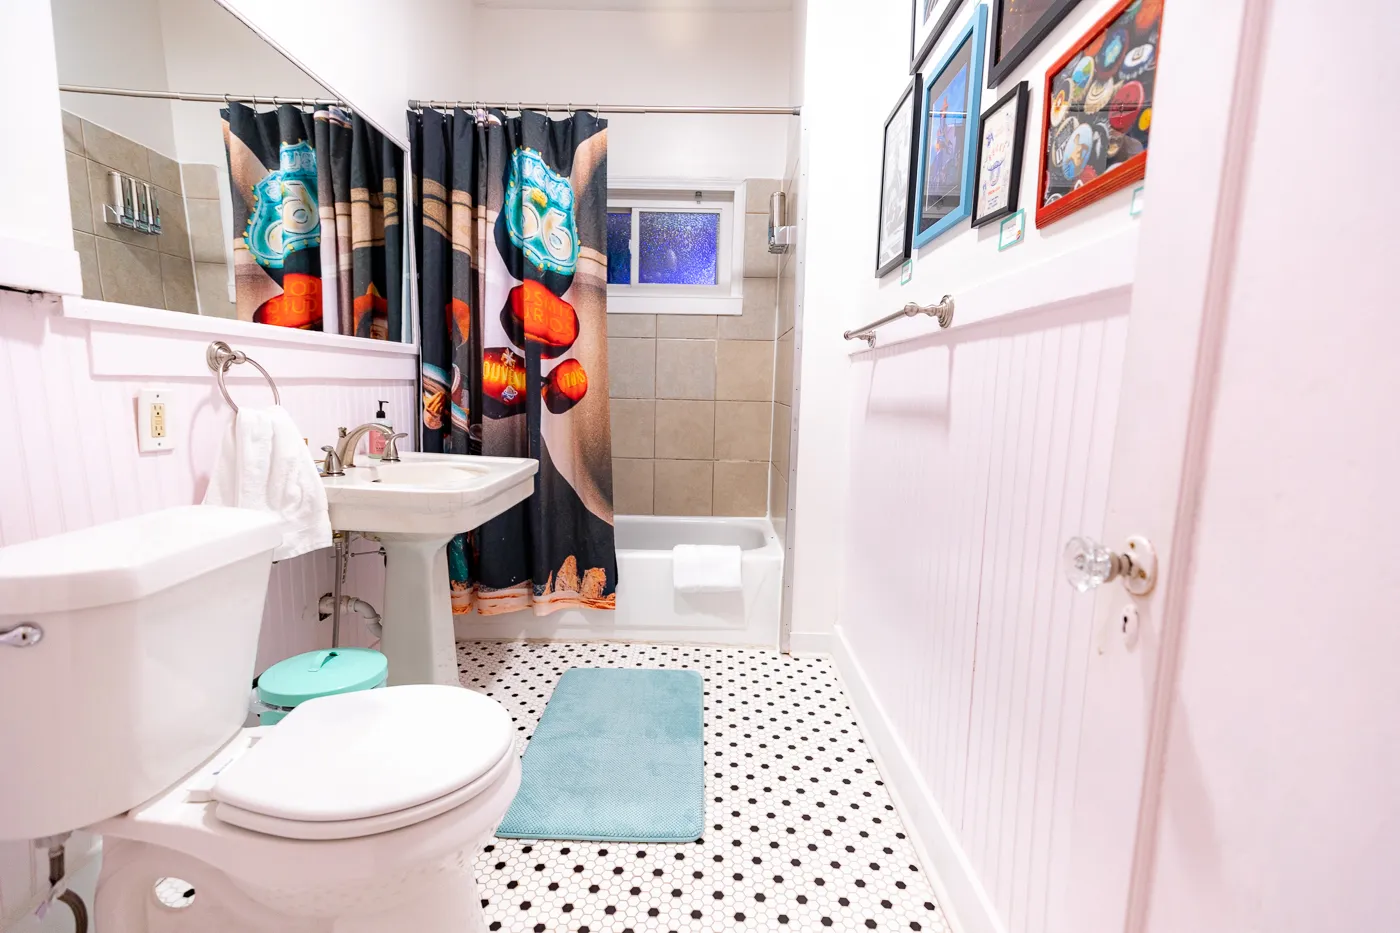 Bathroom at Buck's Cosmic Crash Pad on Route 66 - Route 66 AirBNB in Tulsa, Oklahoma